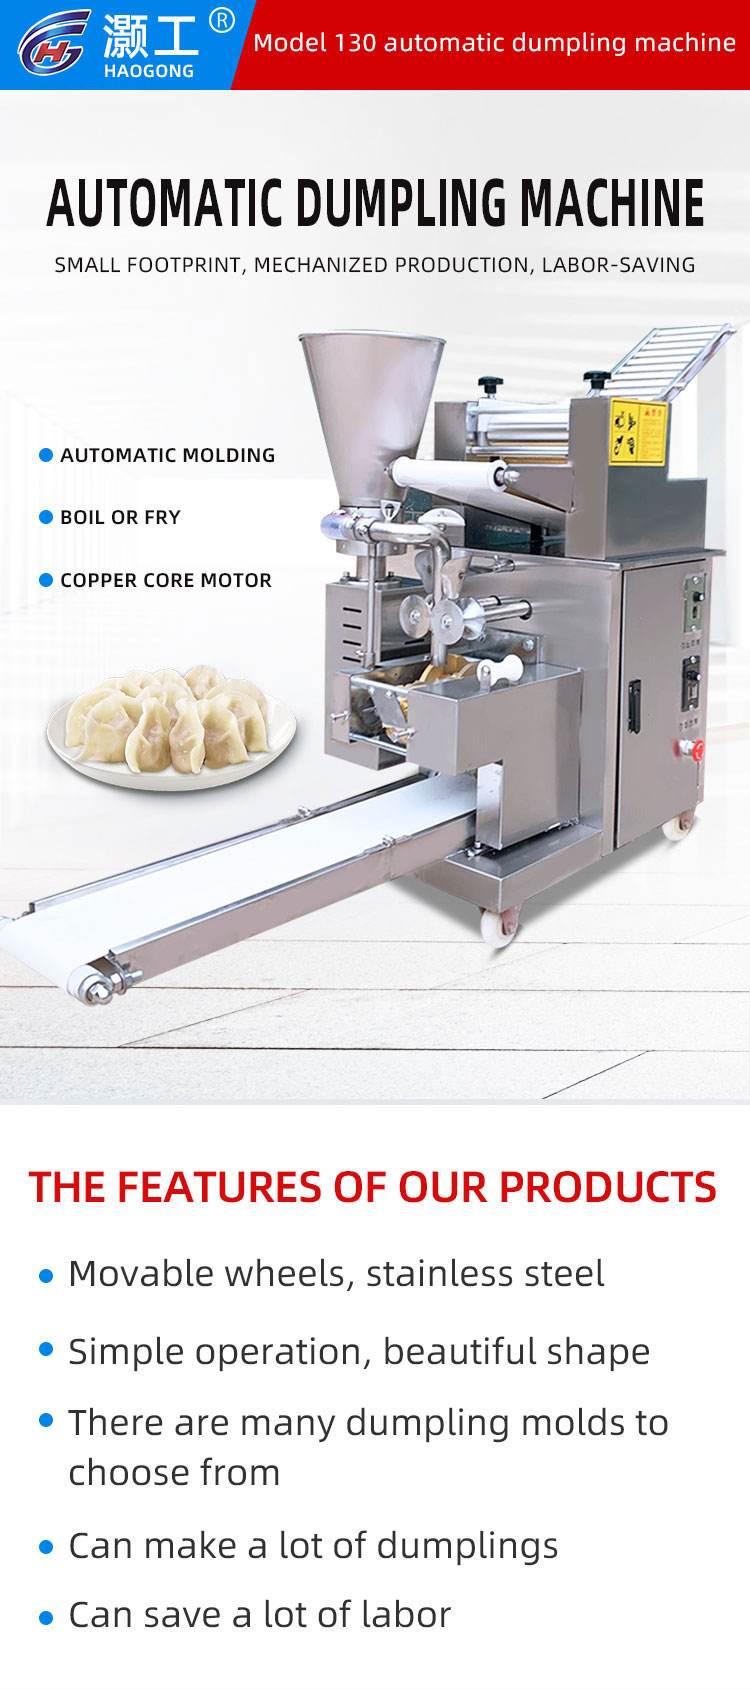 Can be customized as your request  samosa making machine plemeni making machine